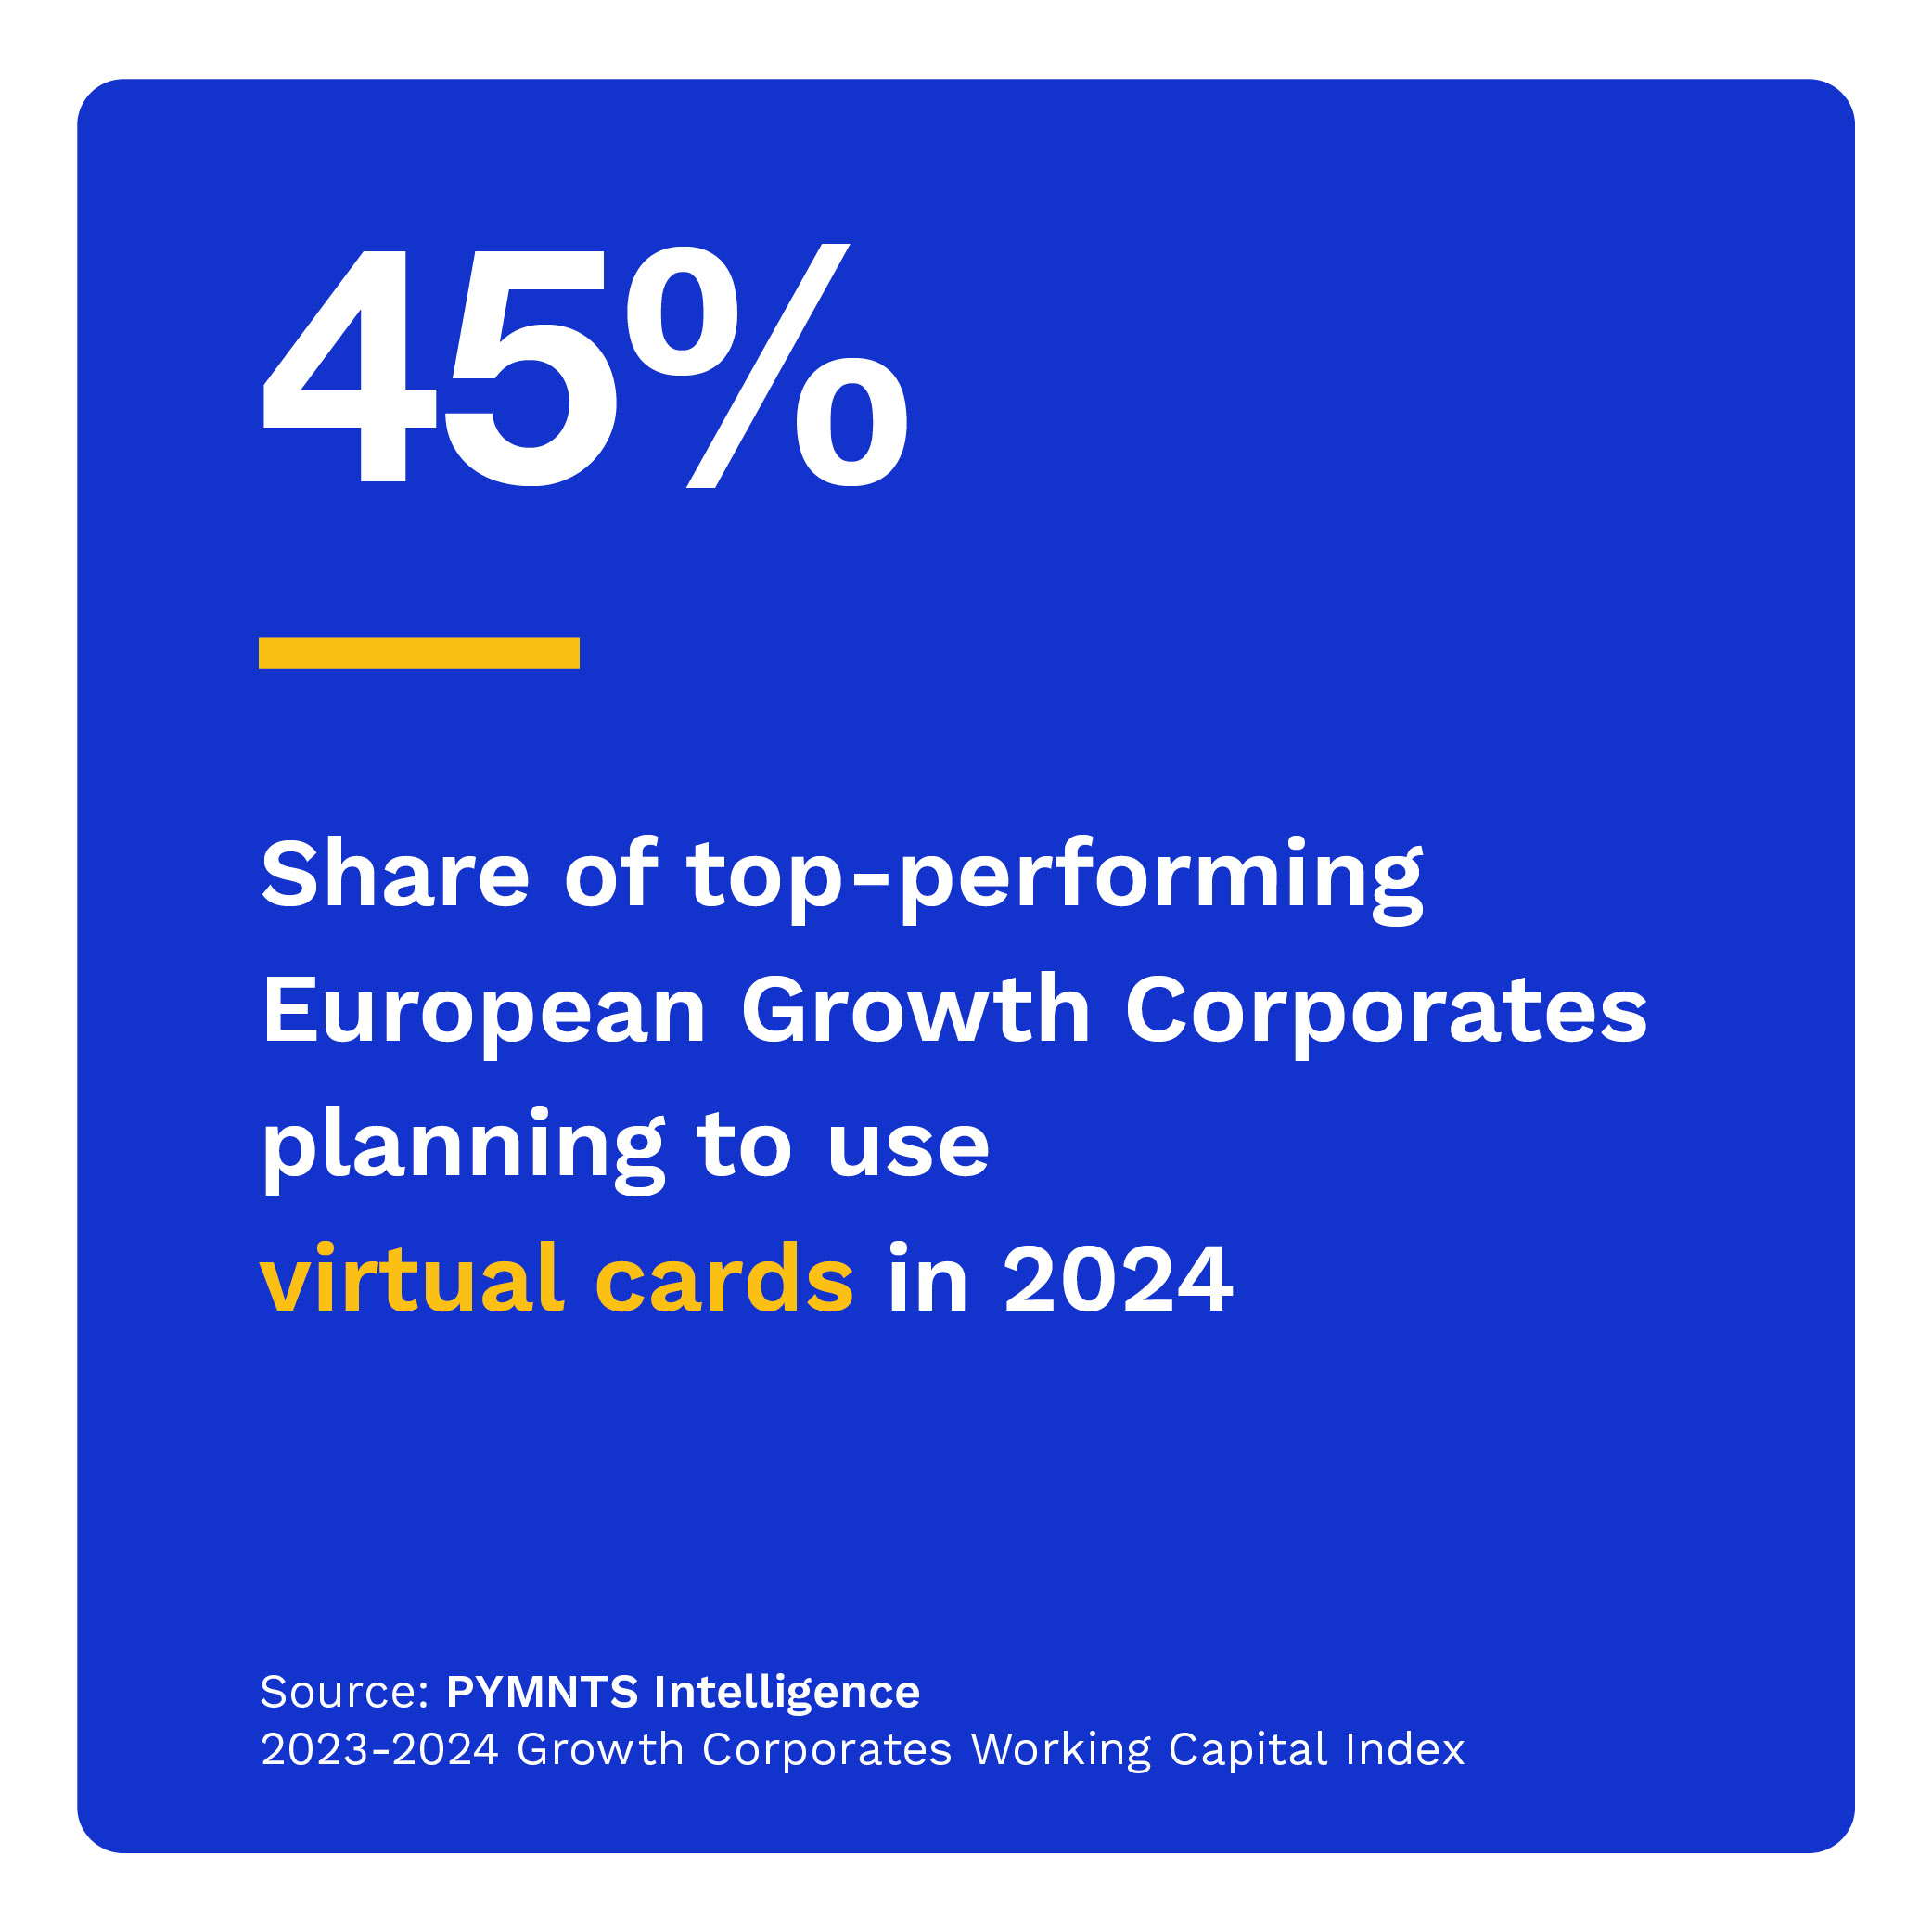  Share of top-performing European Growth Corporates planning to use virtual cards in 2024